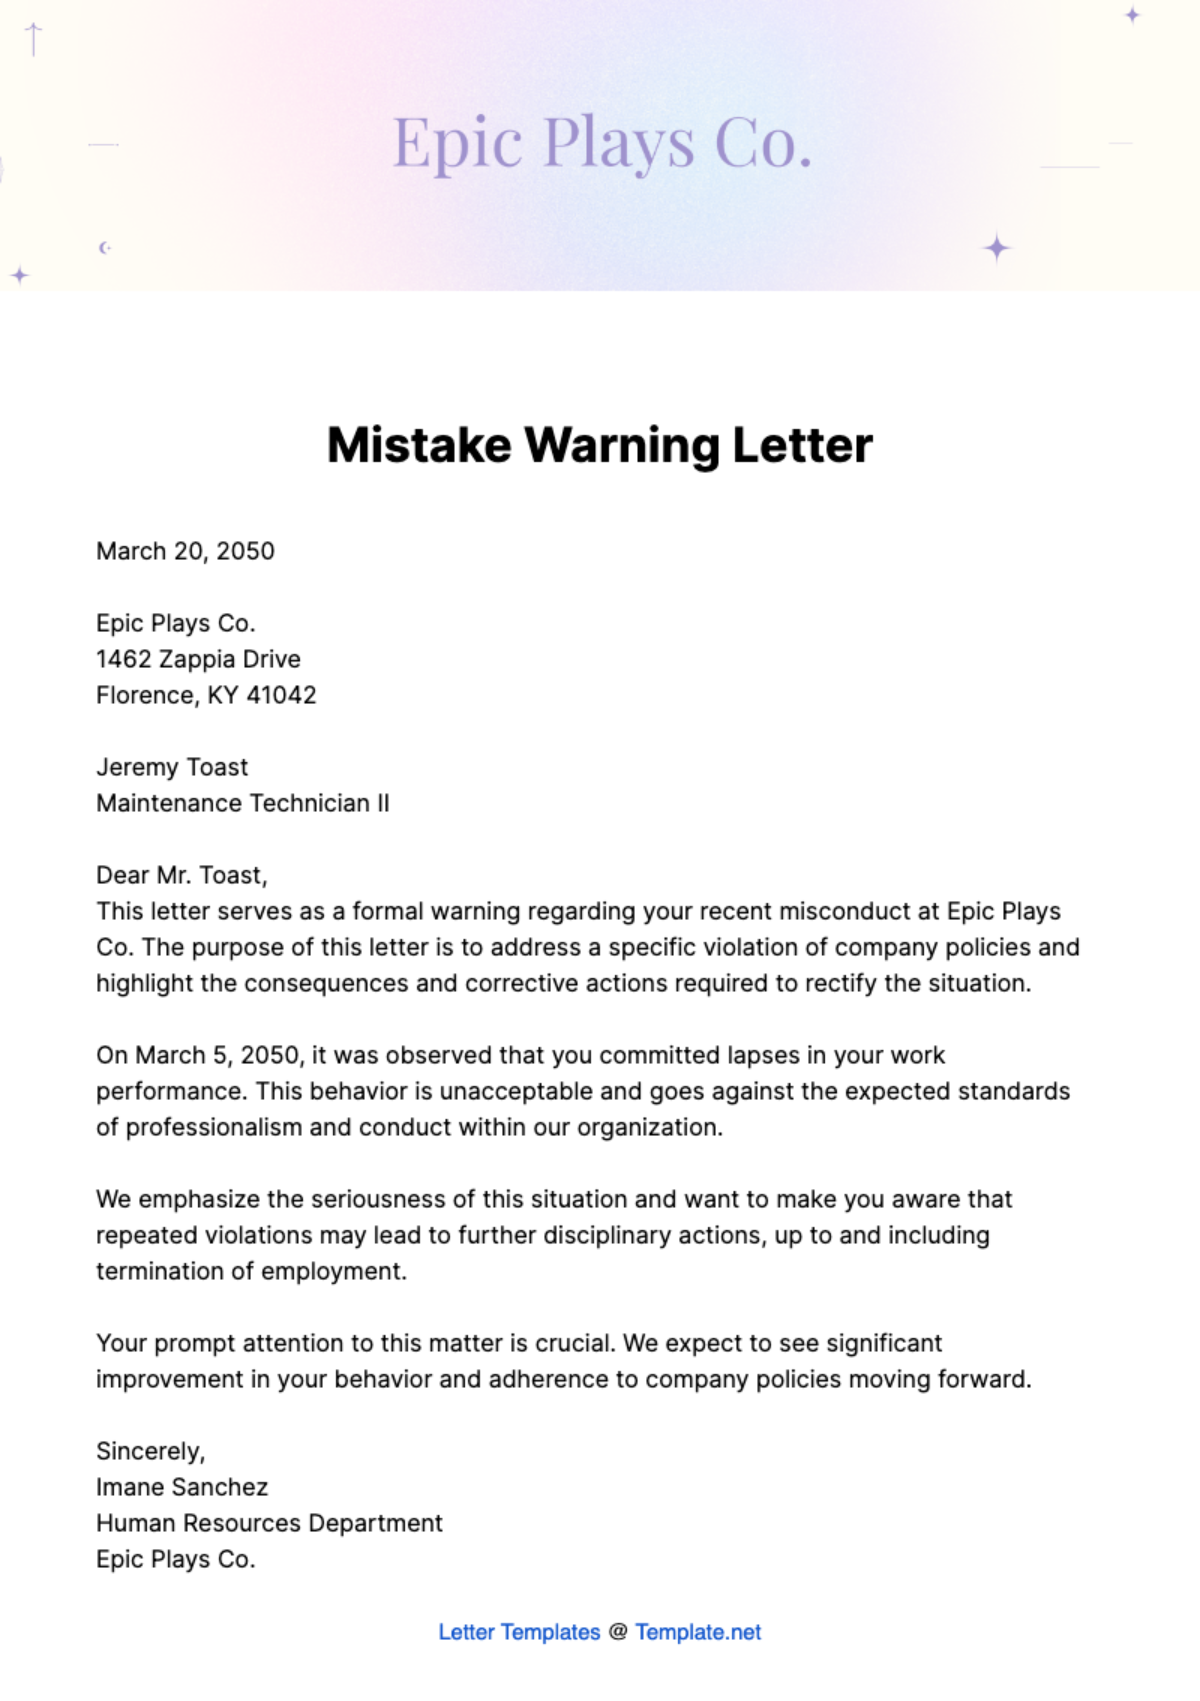 Free Mistake Warning Letter Template